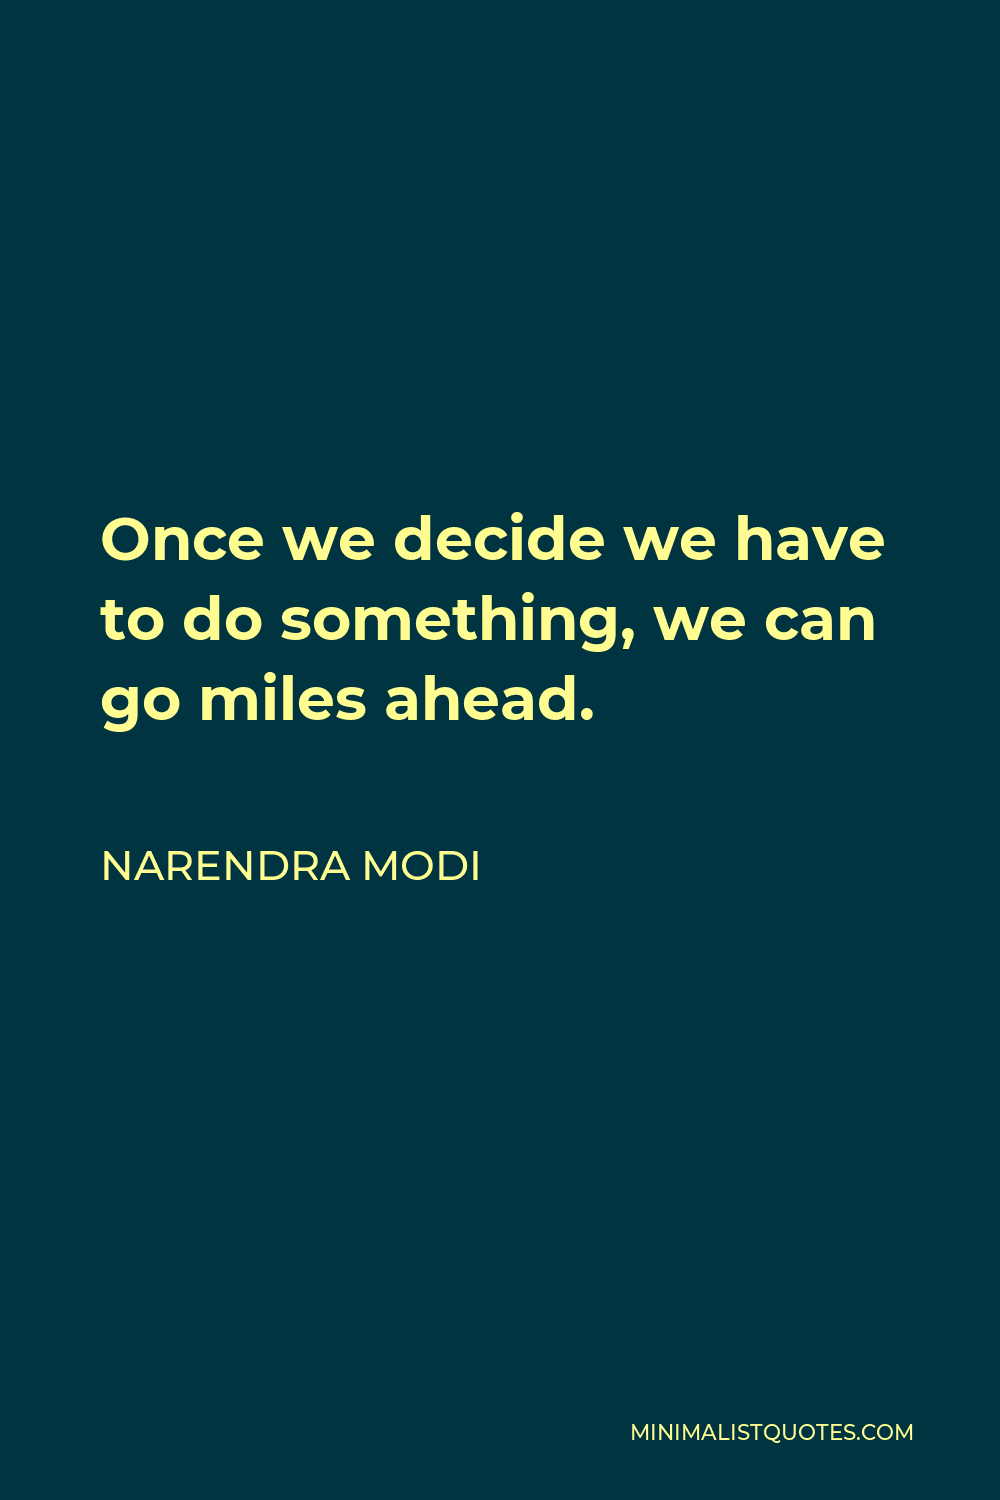 Narendra Modi Quote - Once we decide we have to do something, we can go miles ahead.